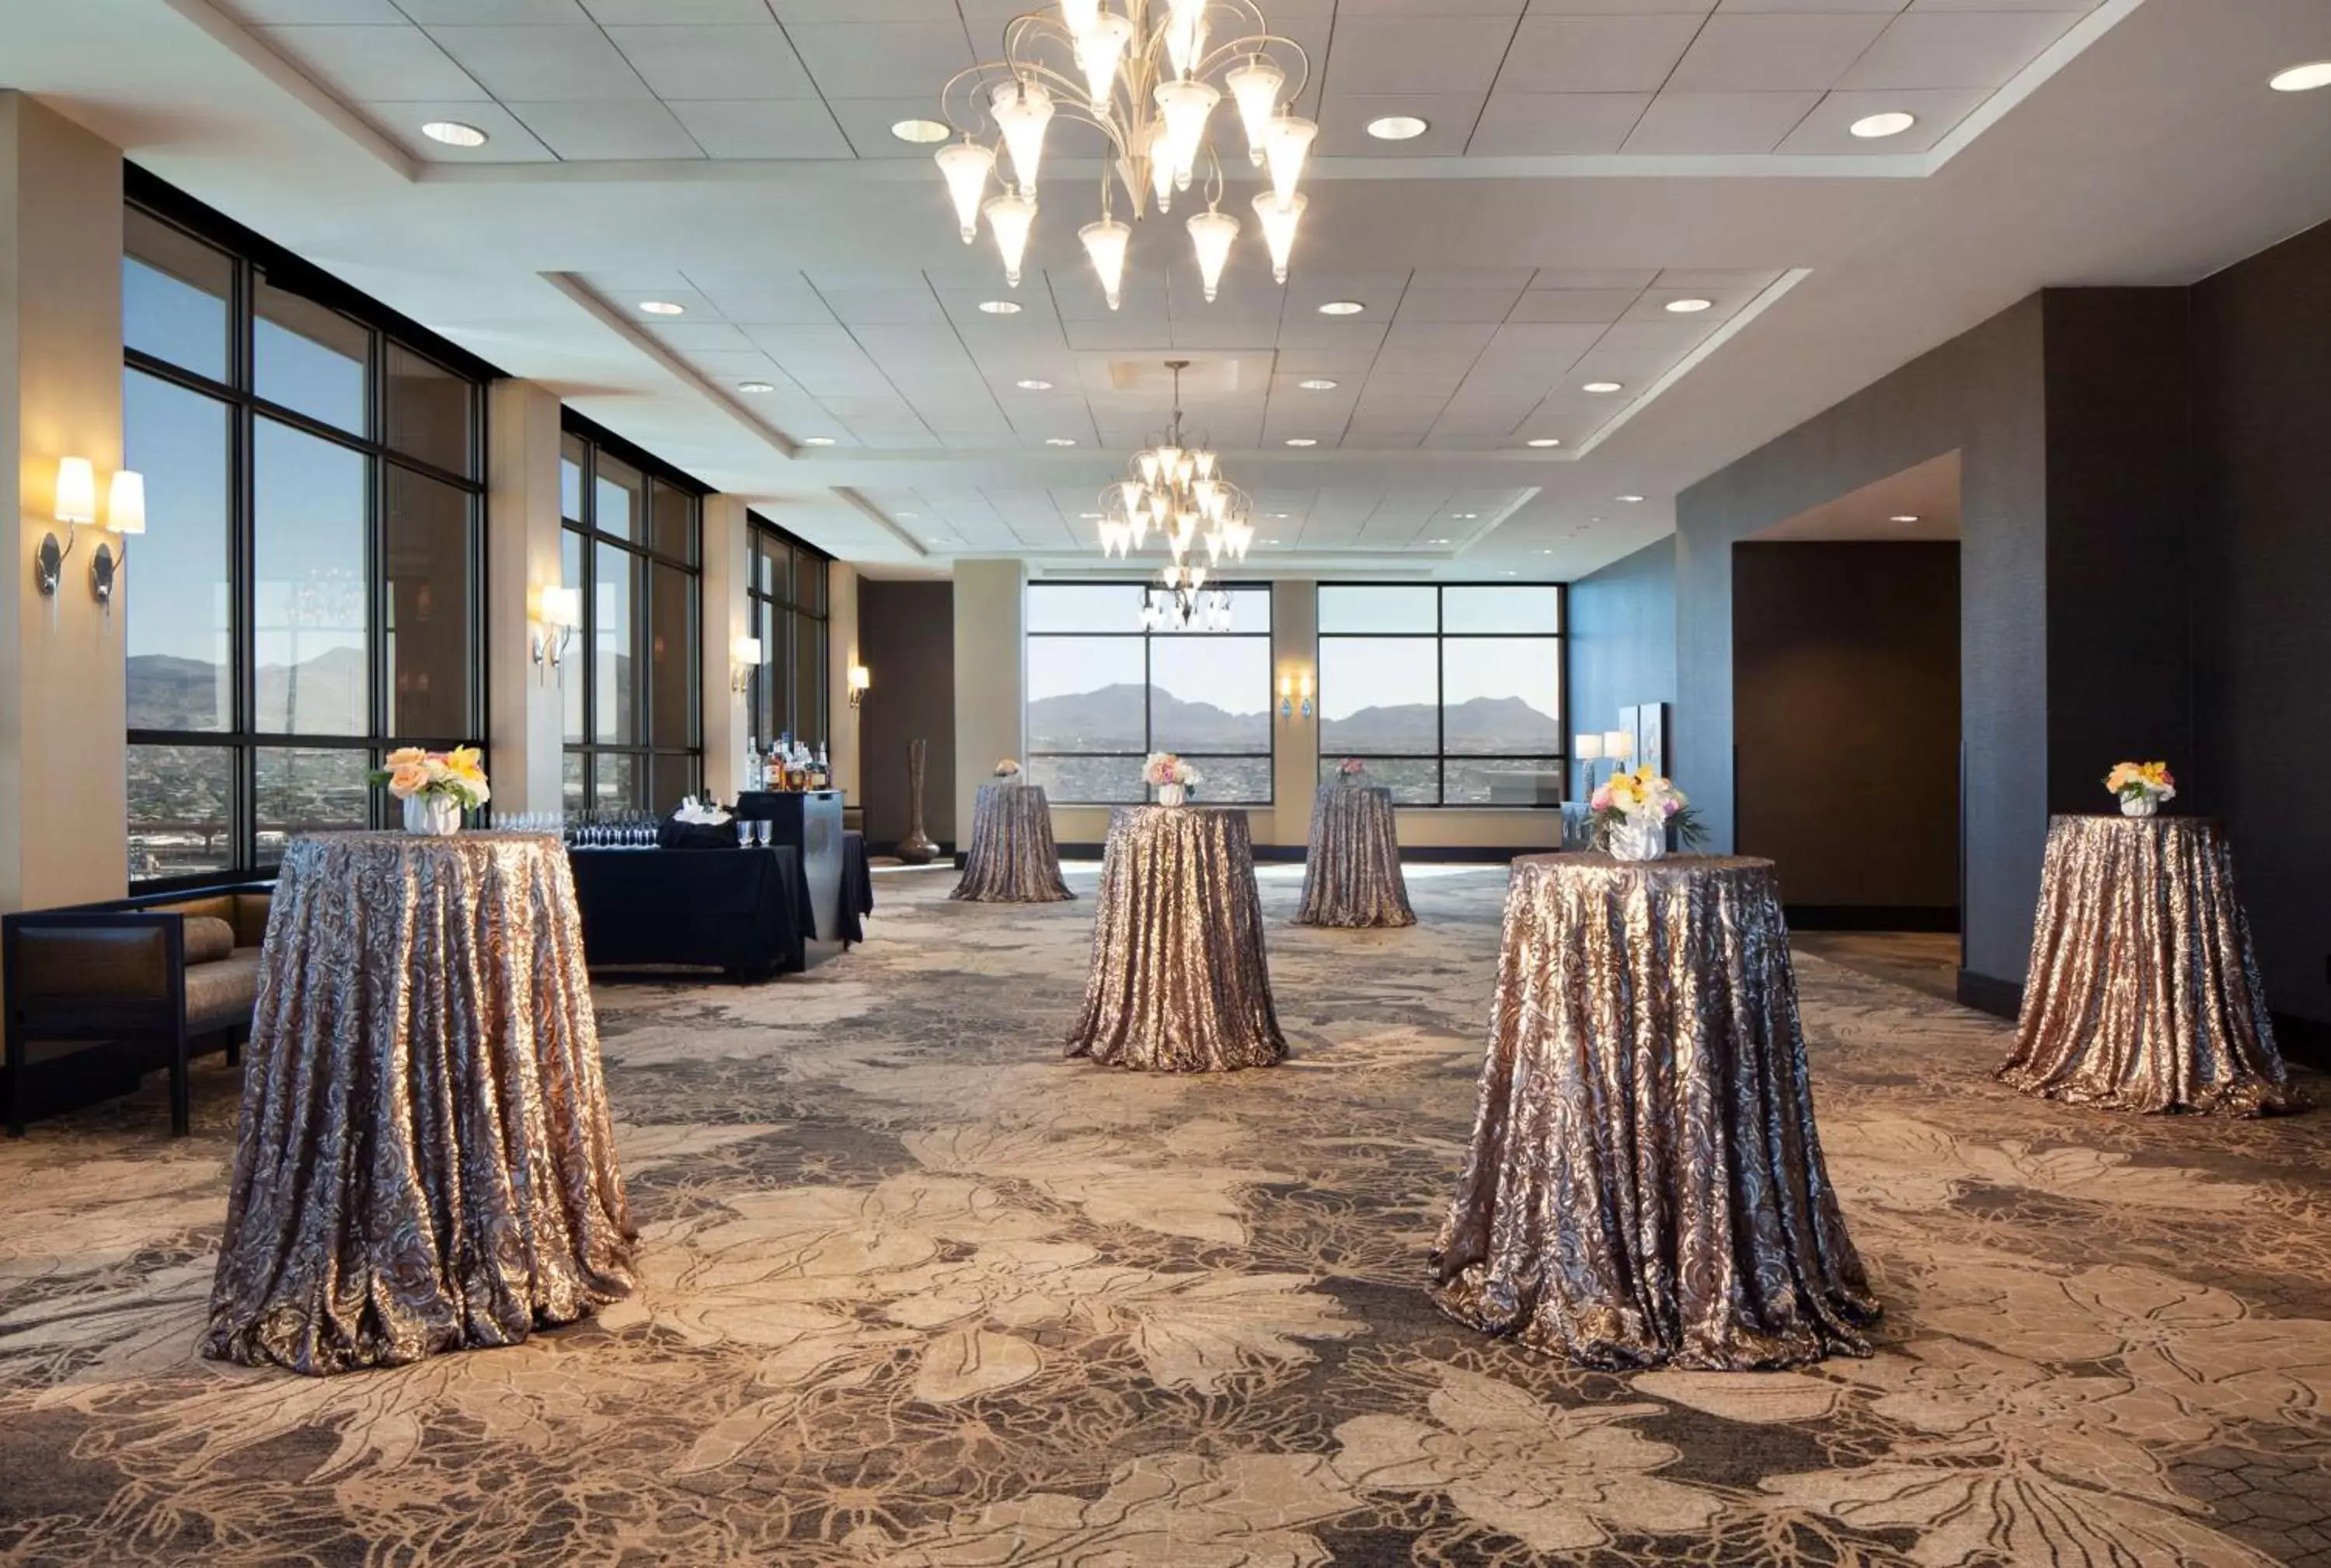 Meeting/conference room, Banquet Facilities in DoubleTree by Hilton El Paso Downtown